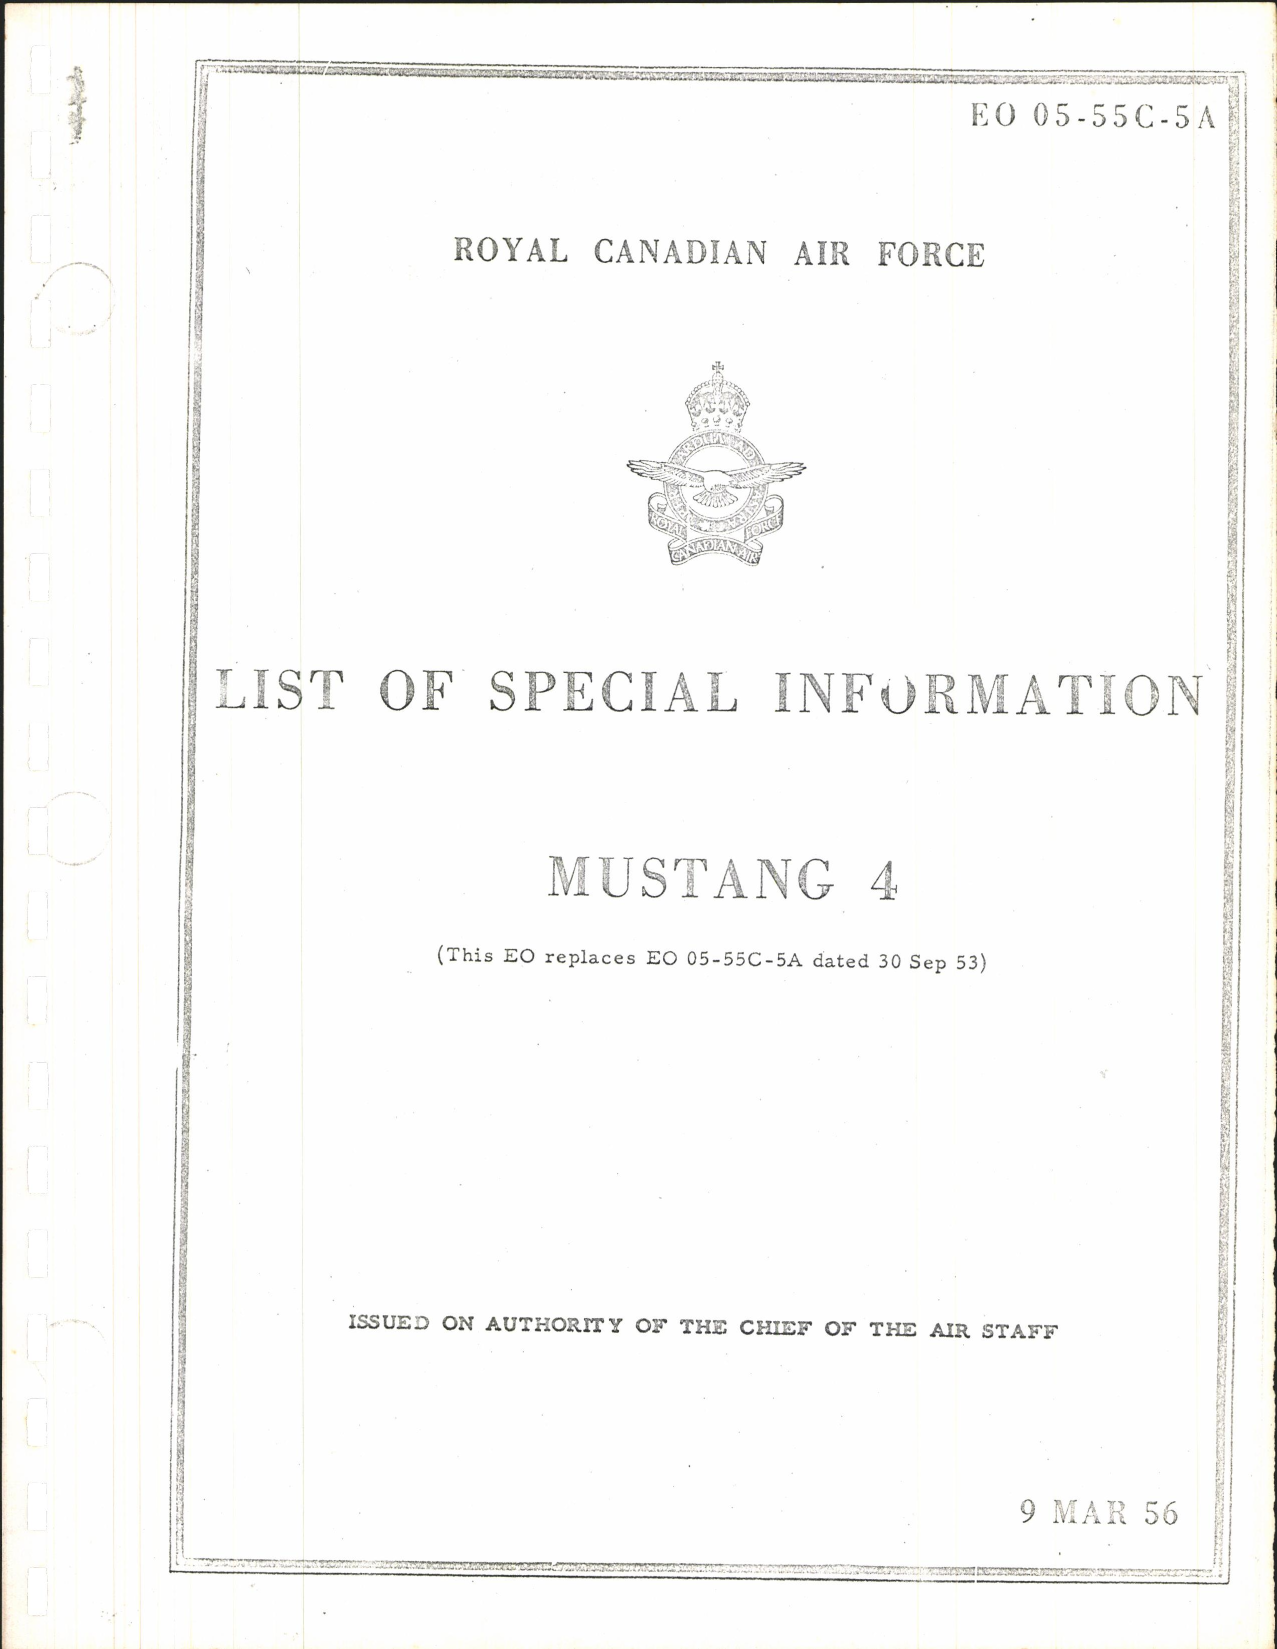 Sample page 1 from AirCorps Library document: List of Special Information for Mustang 4